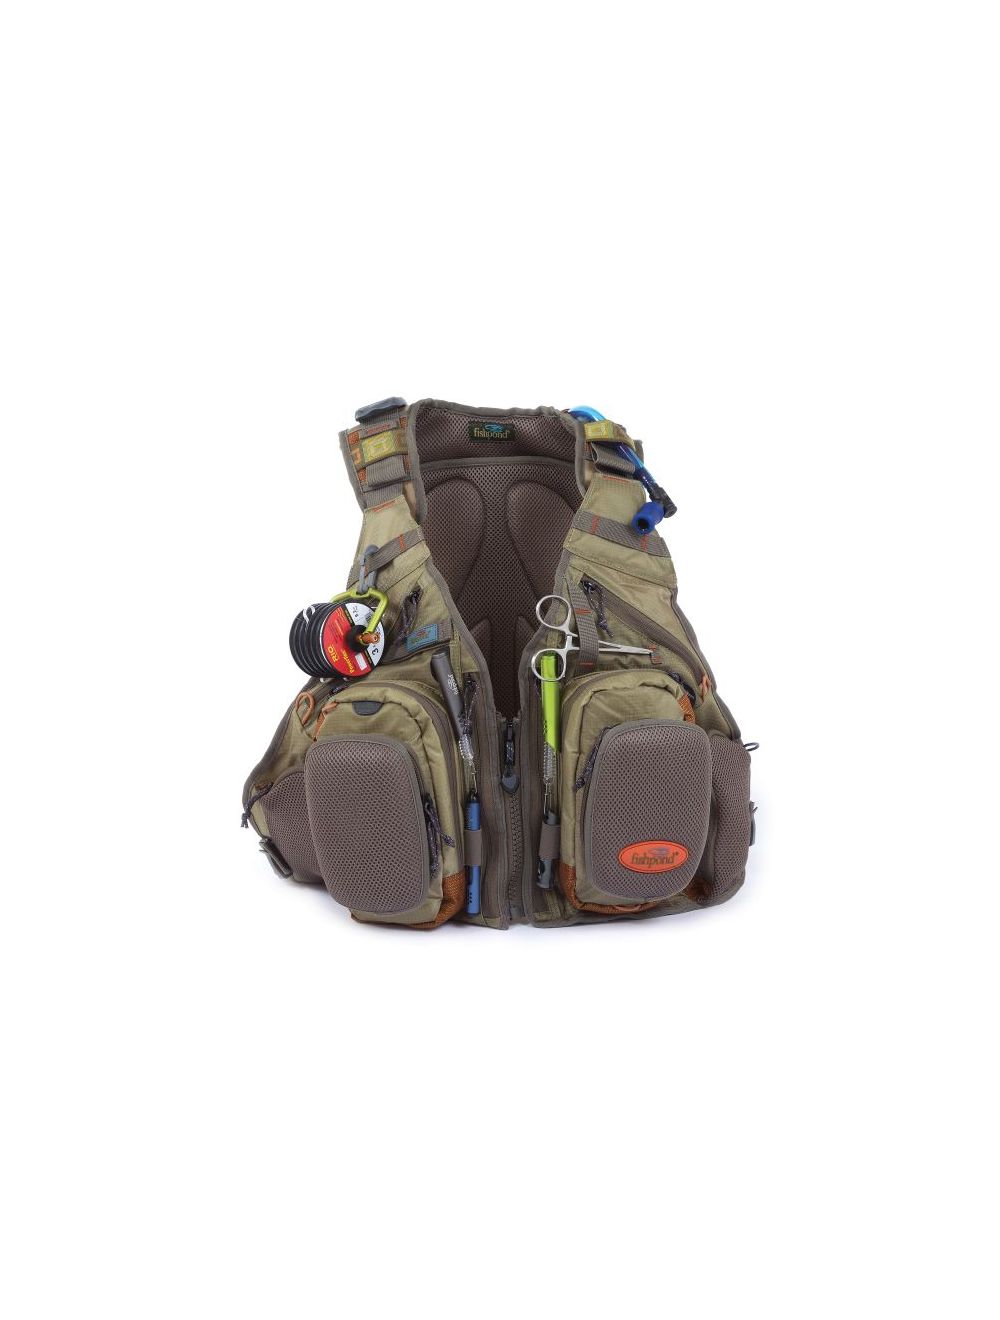 Fishpond Wasatch Tech pack TheFlyStop